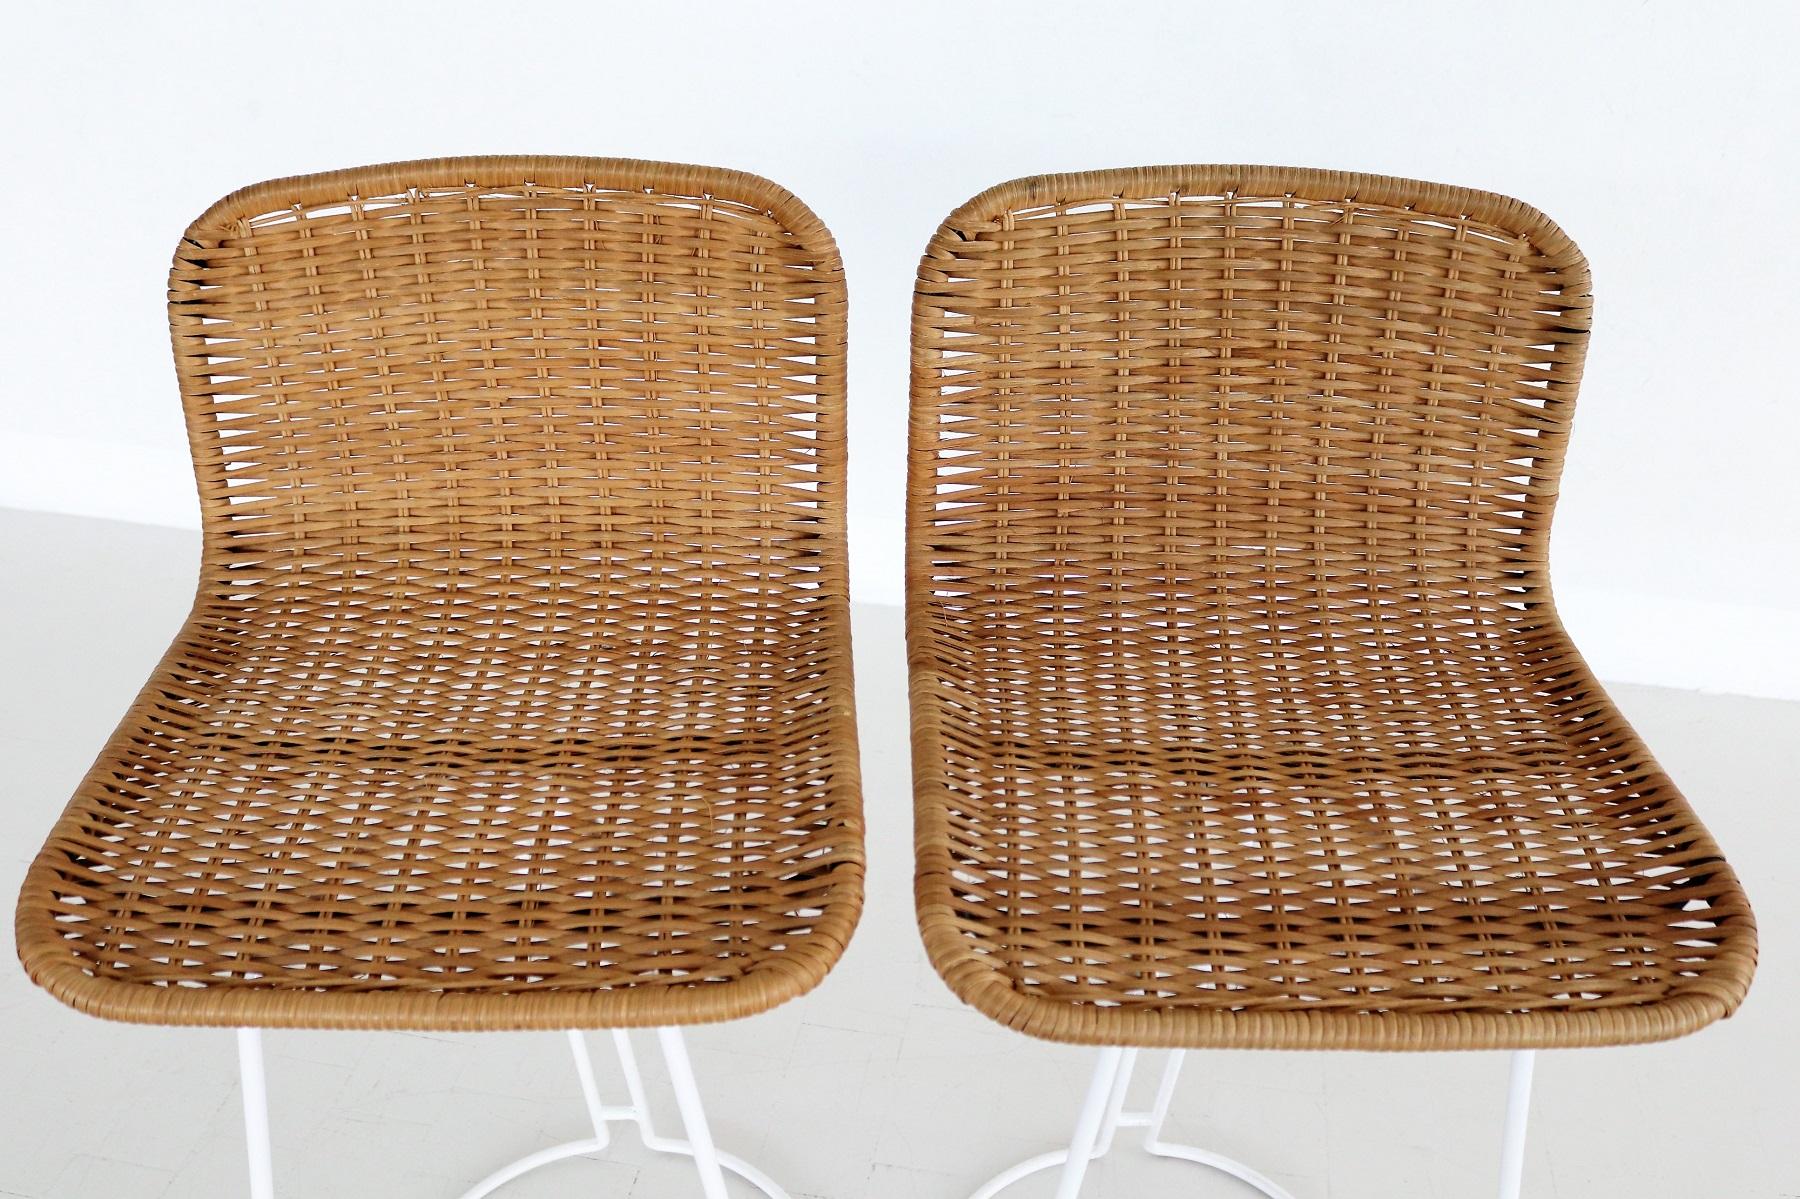 Italian Midcentury Bar Stools in Wicker and Metal by Cidue, 1980s For Sale 2